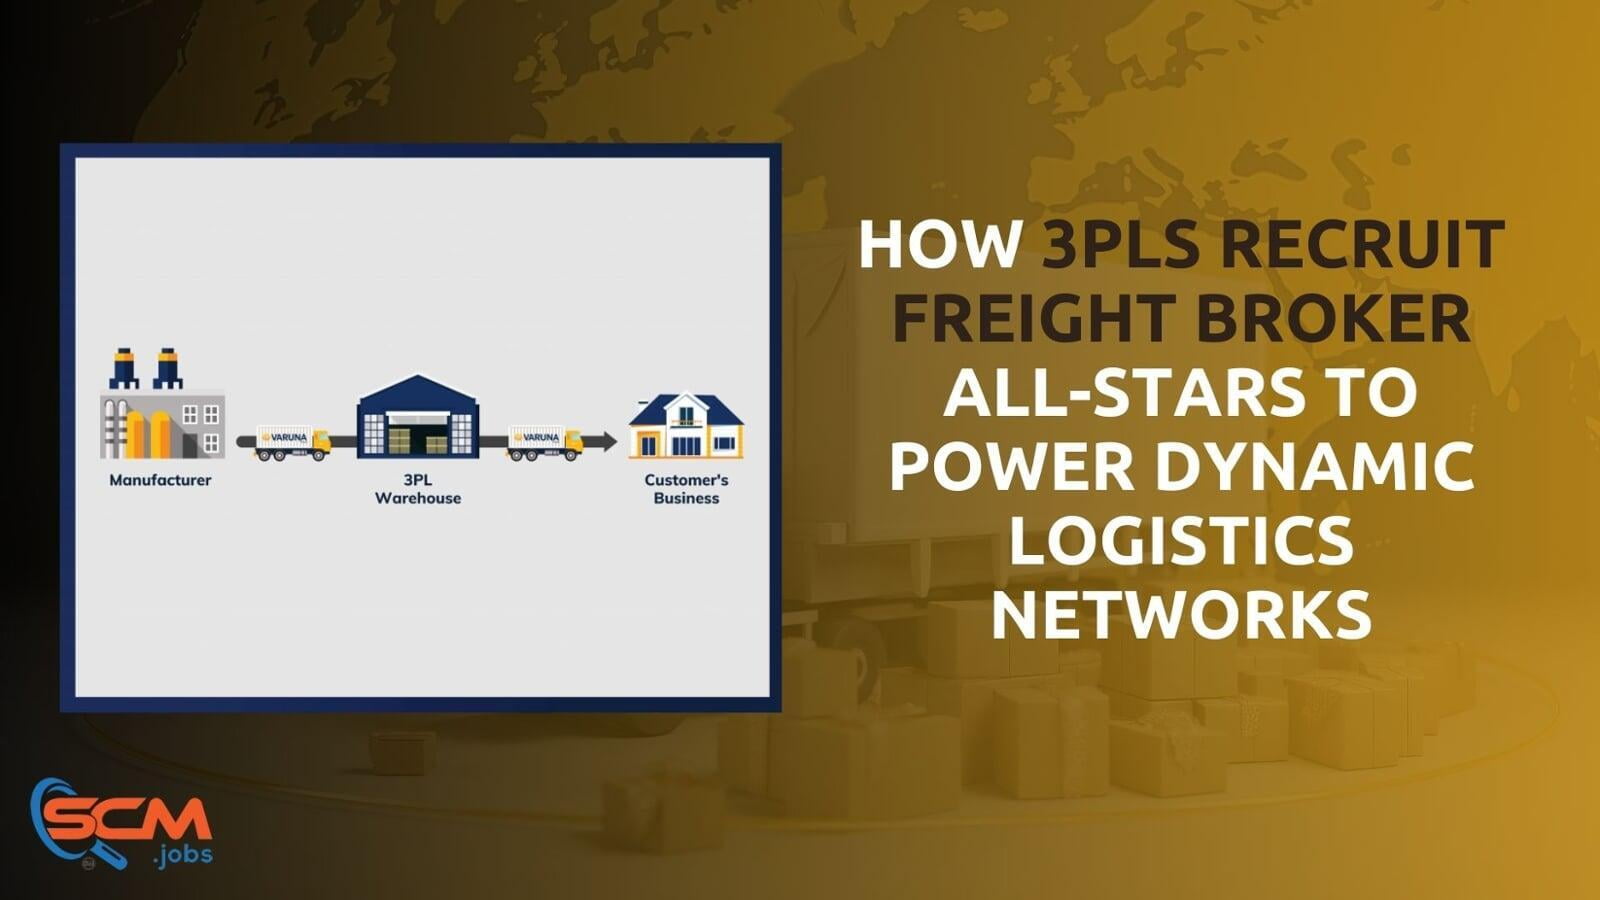 Playing the Field: How 3PLs Recruit Freight Broker All-Stars to Power Dynamic Logistics Networks